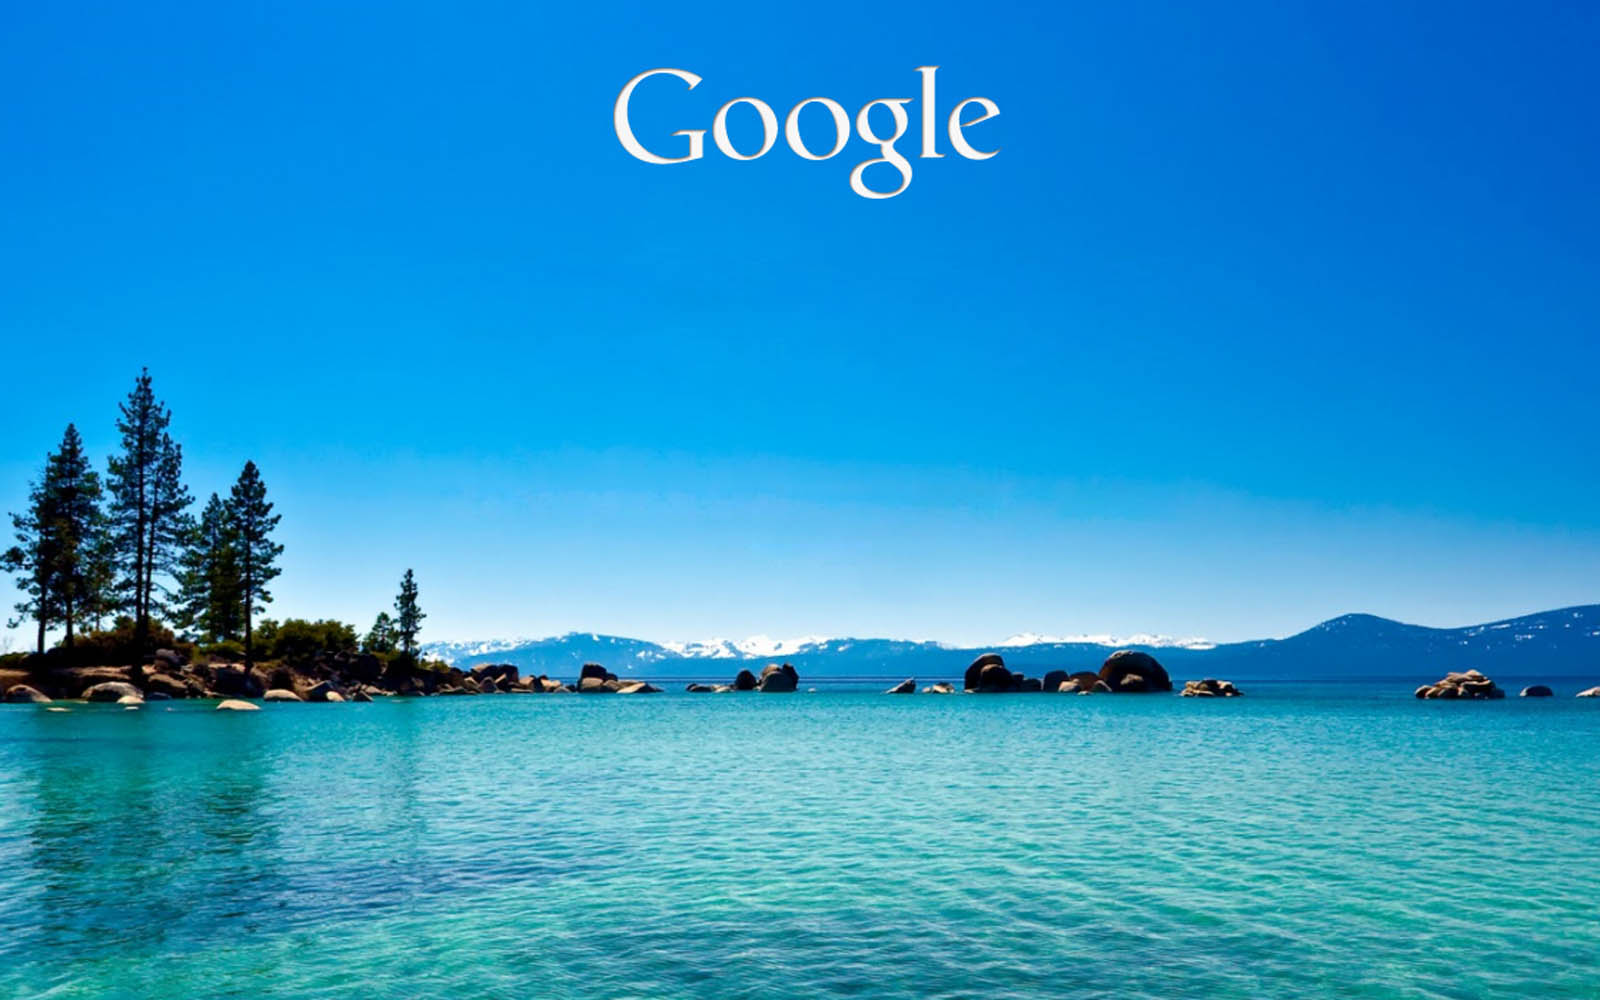 Tag Google Background Wallpaper Paos Pictures And Image For